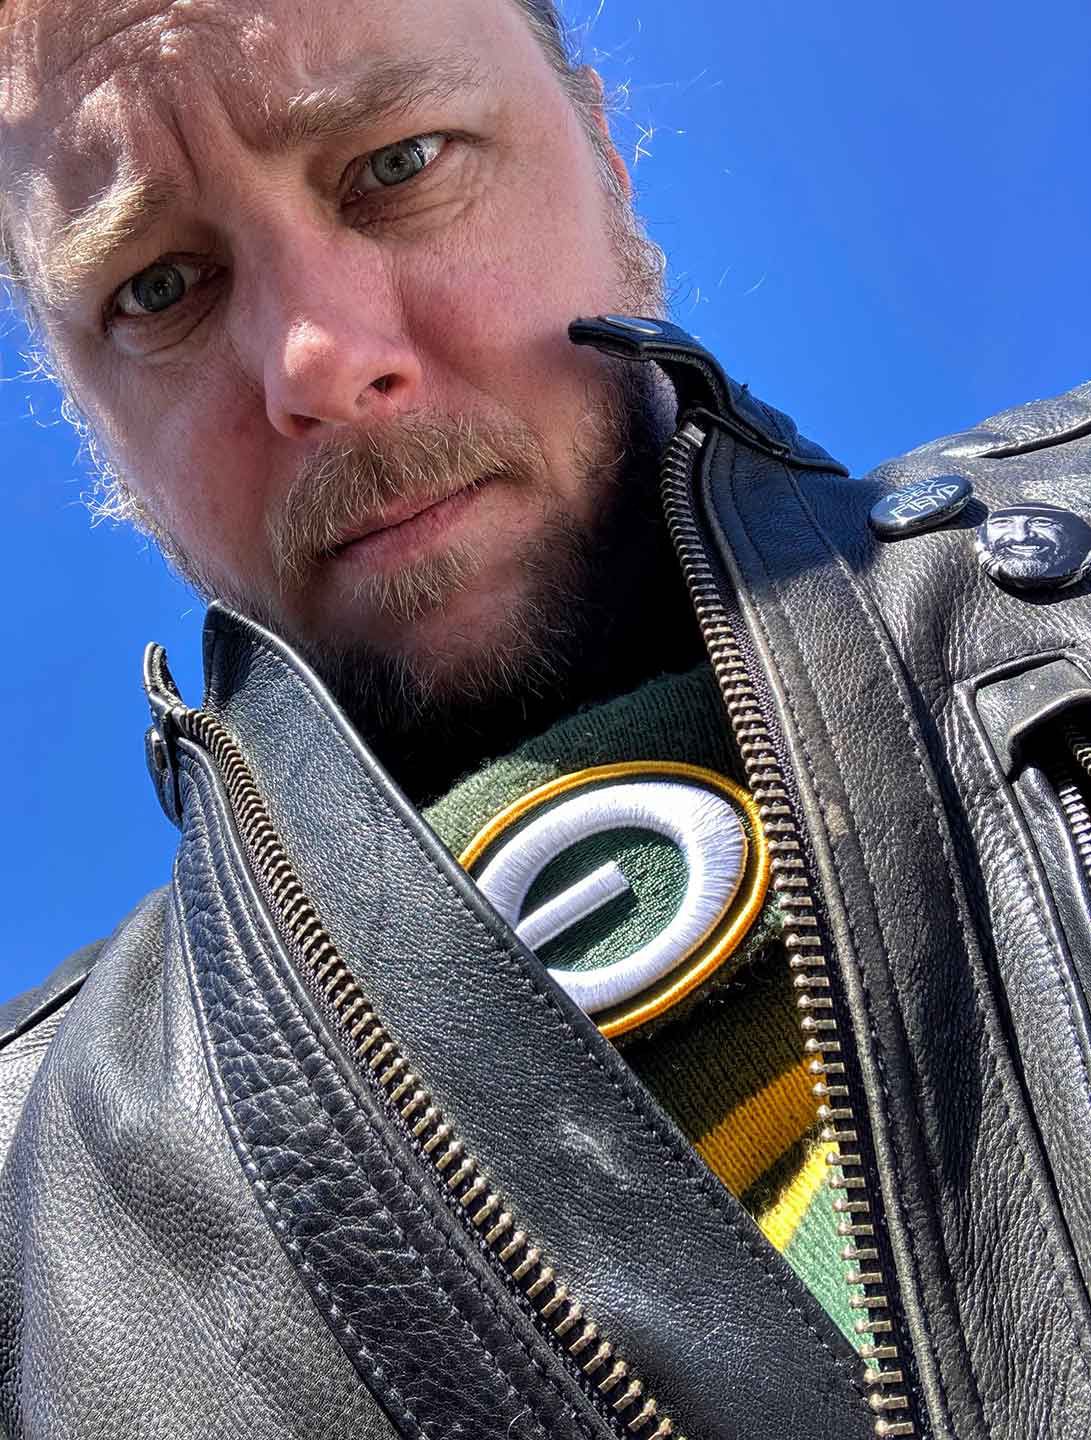 The spring chill in Texas is no match for a Green Bay Packer hat under the leathers.